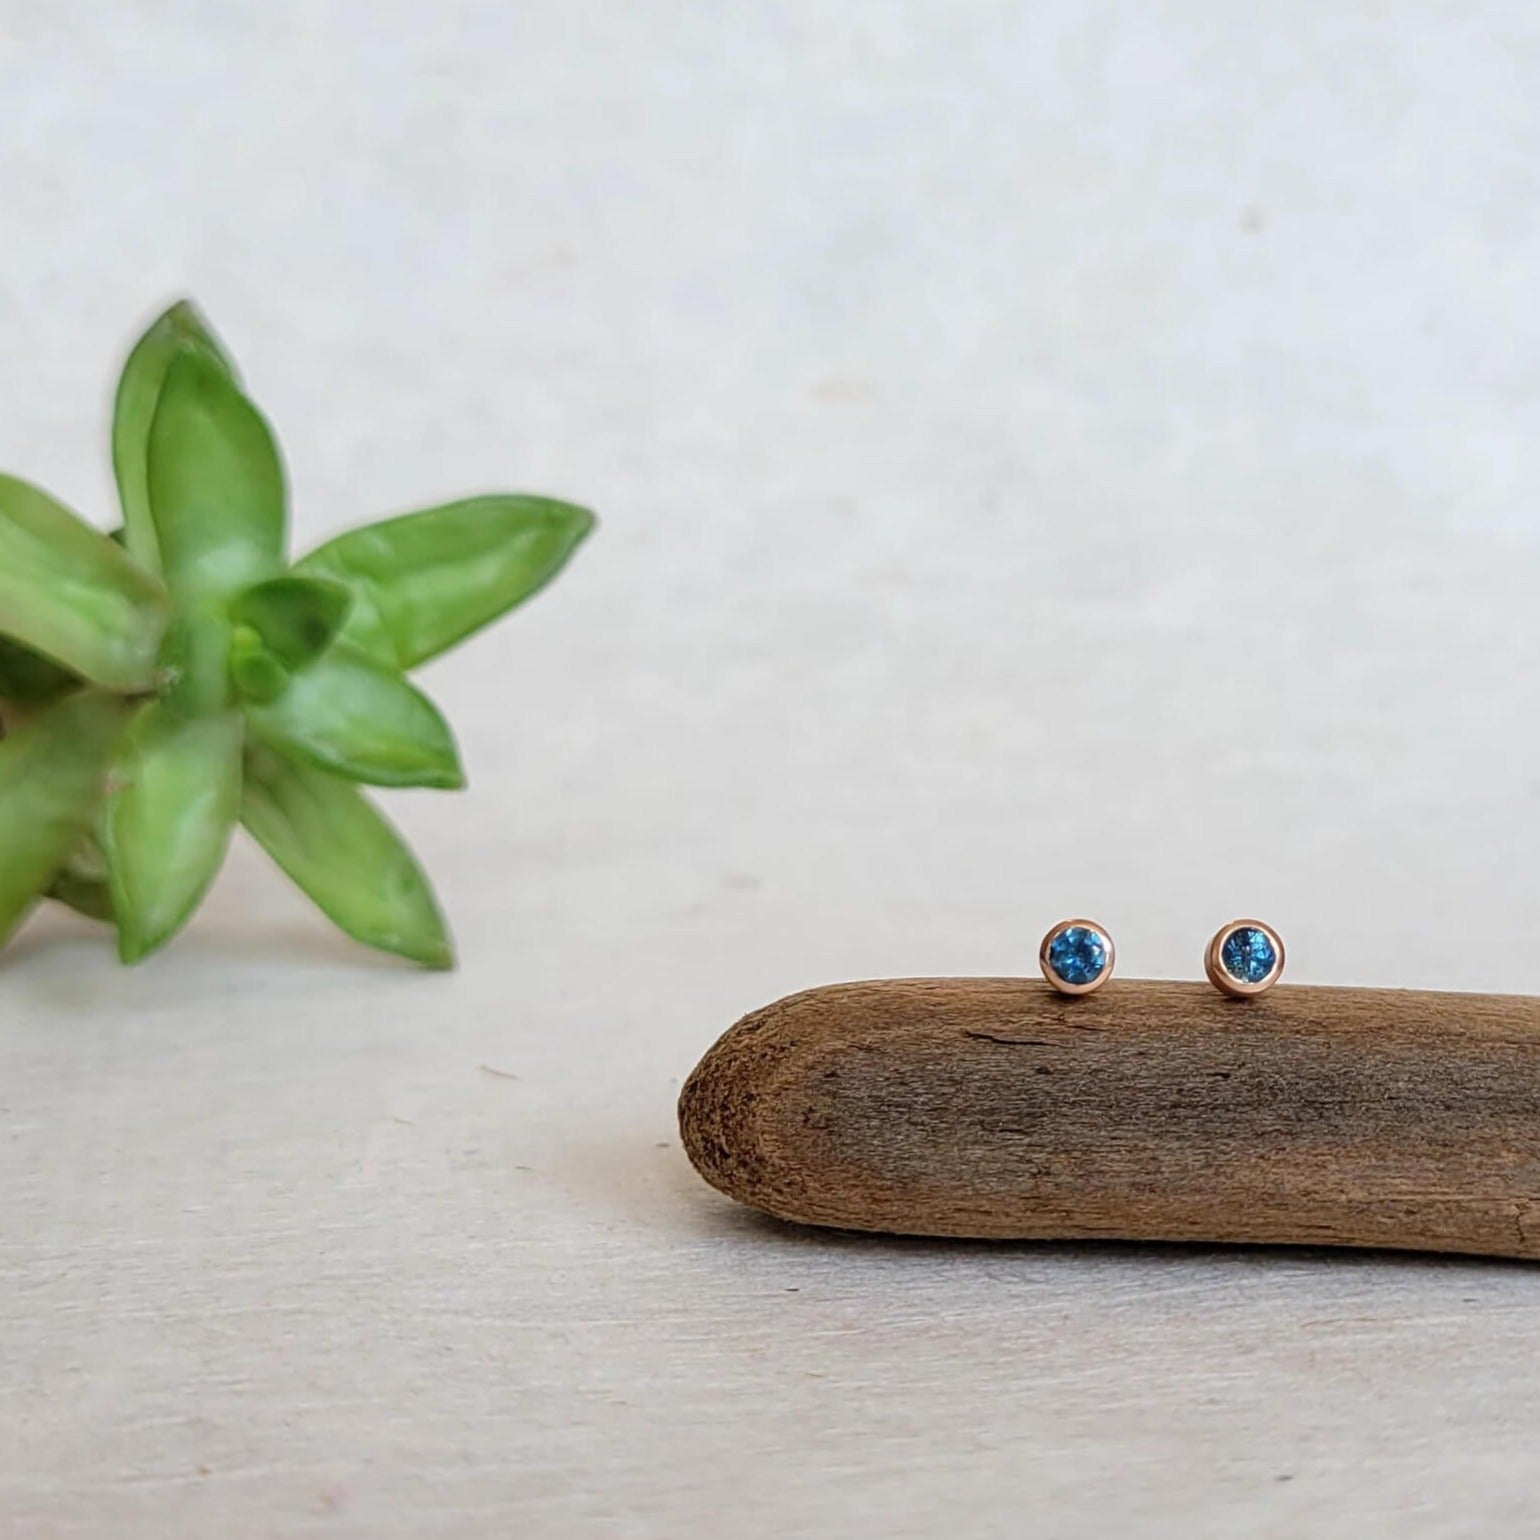 Blue sapphire stud earrings bezel set in rose gold. Handmade with recycled metal and conflict-free stones.